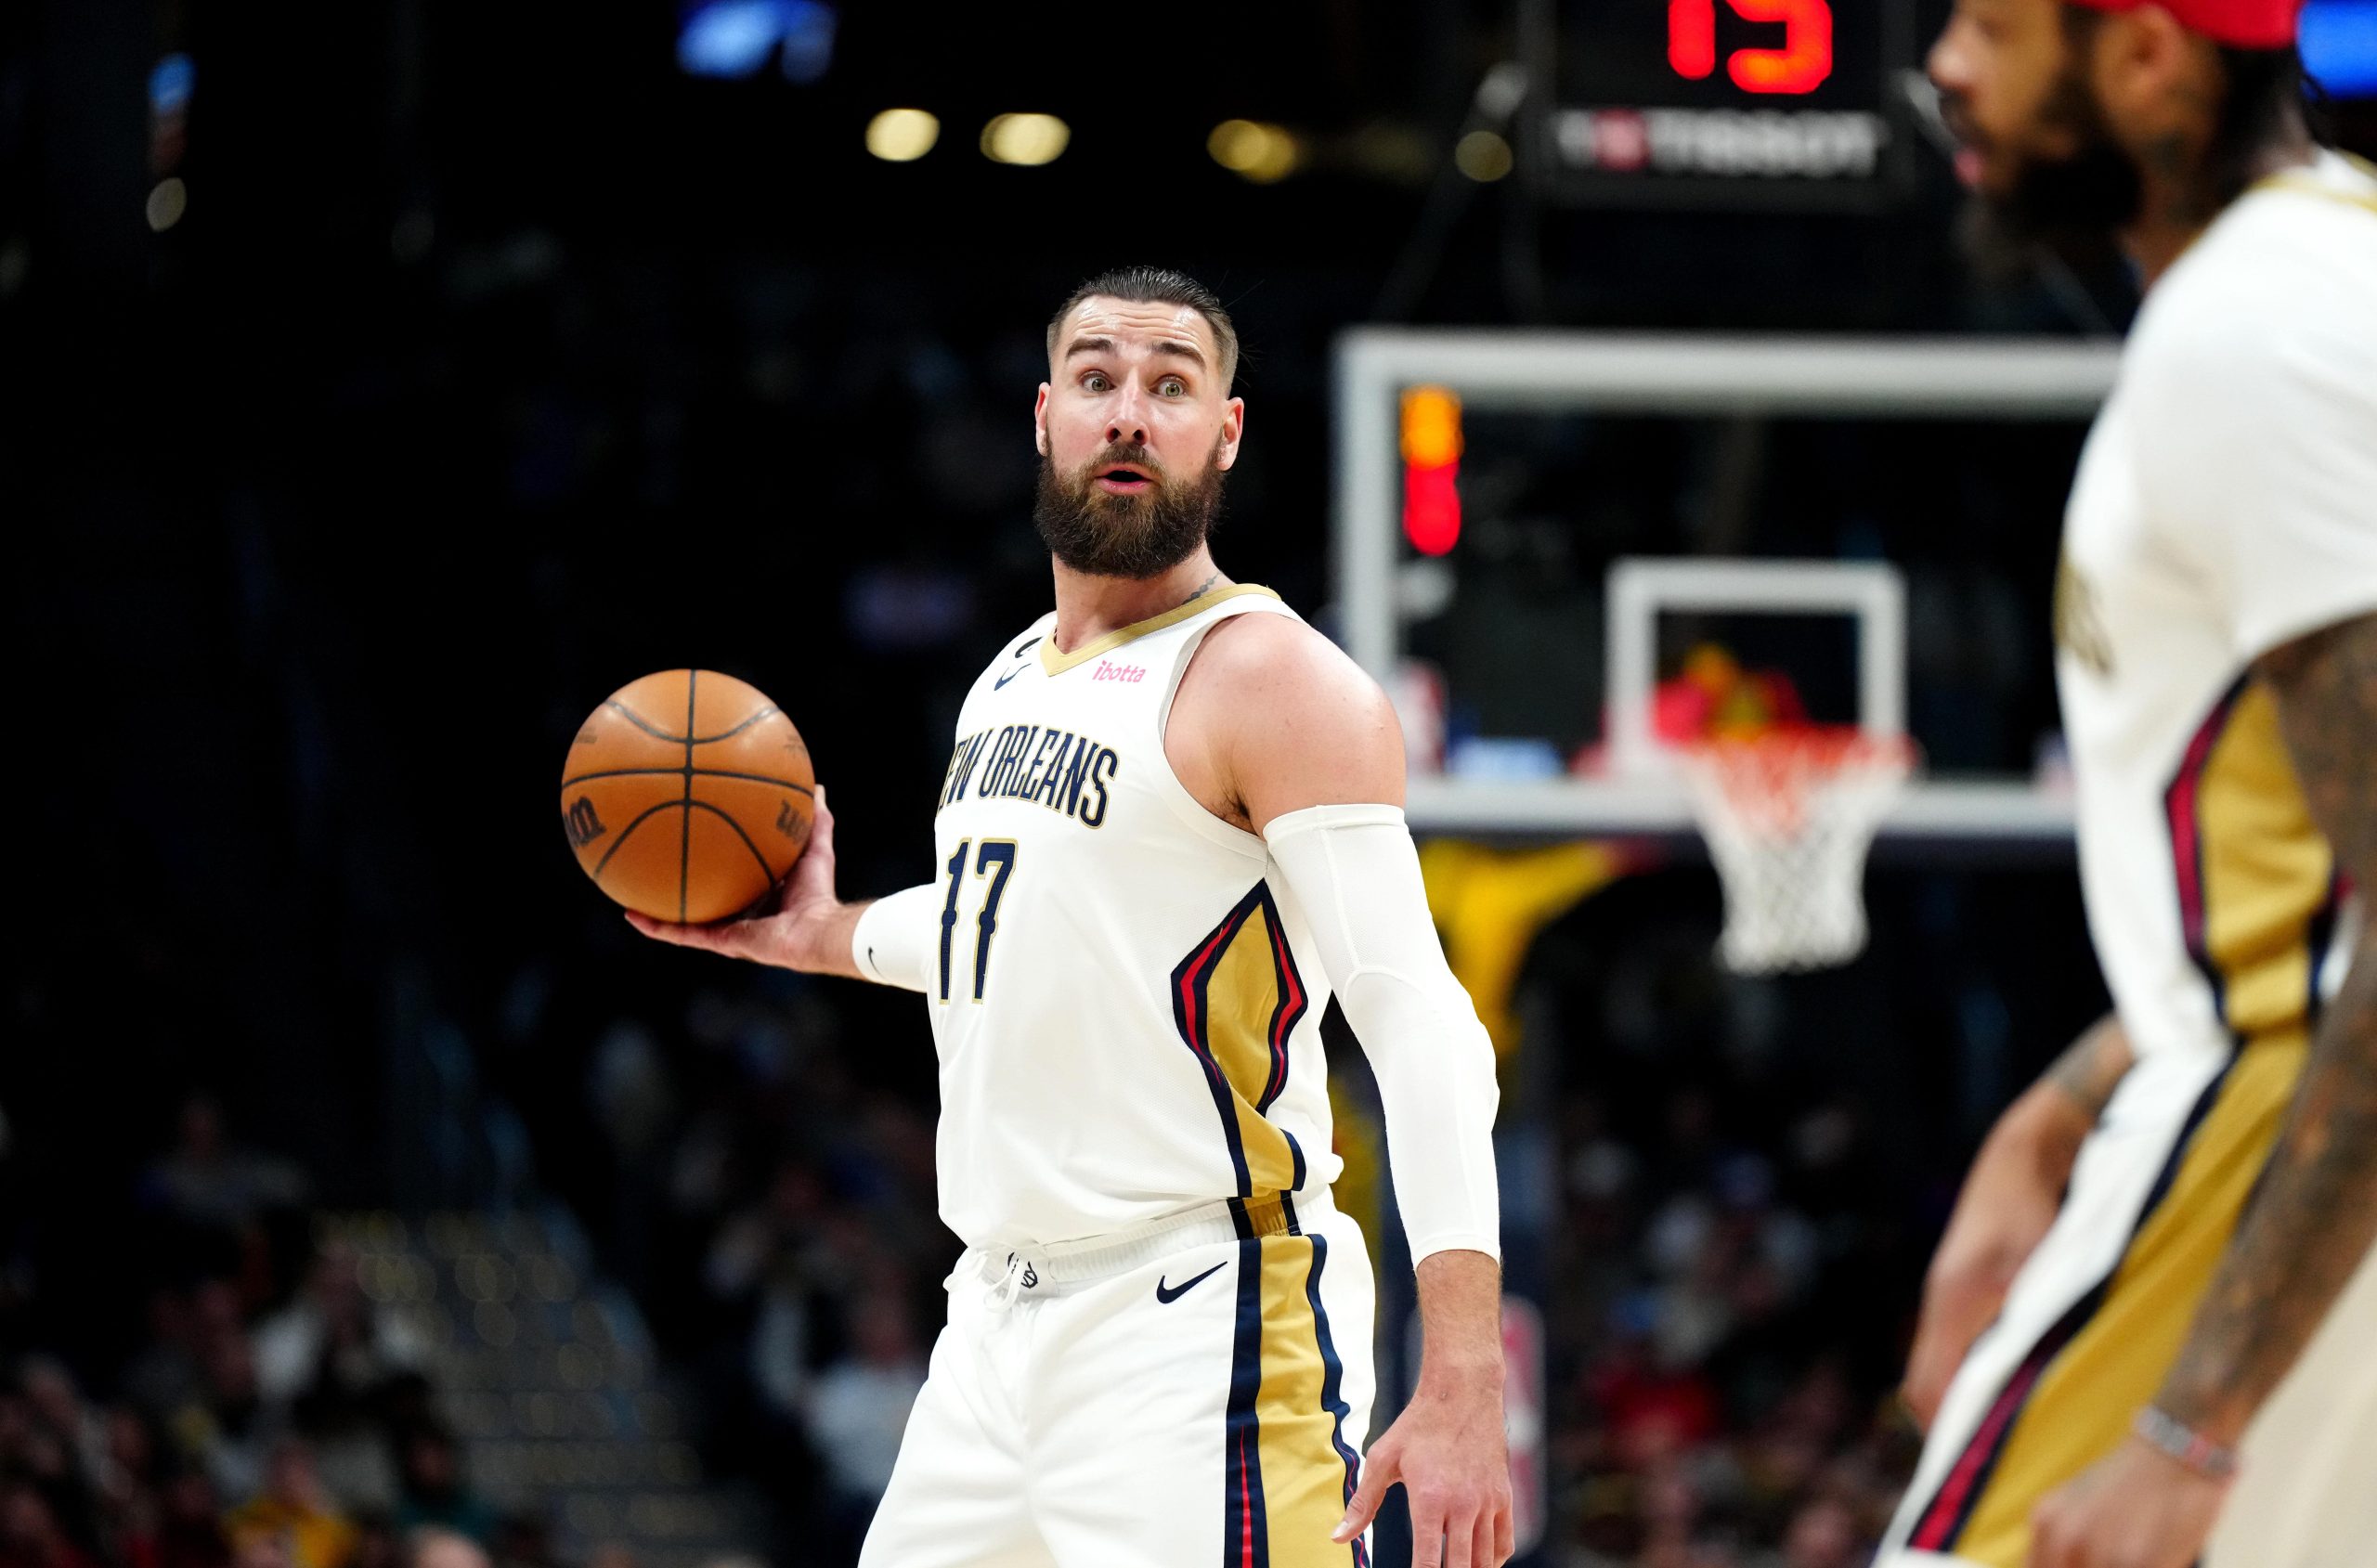 NBA Cleveland Cavaliers vs New Orleans Pelicans Same Game Parlay picks: Valanciunas plays huge role at +930 odds